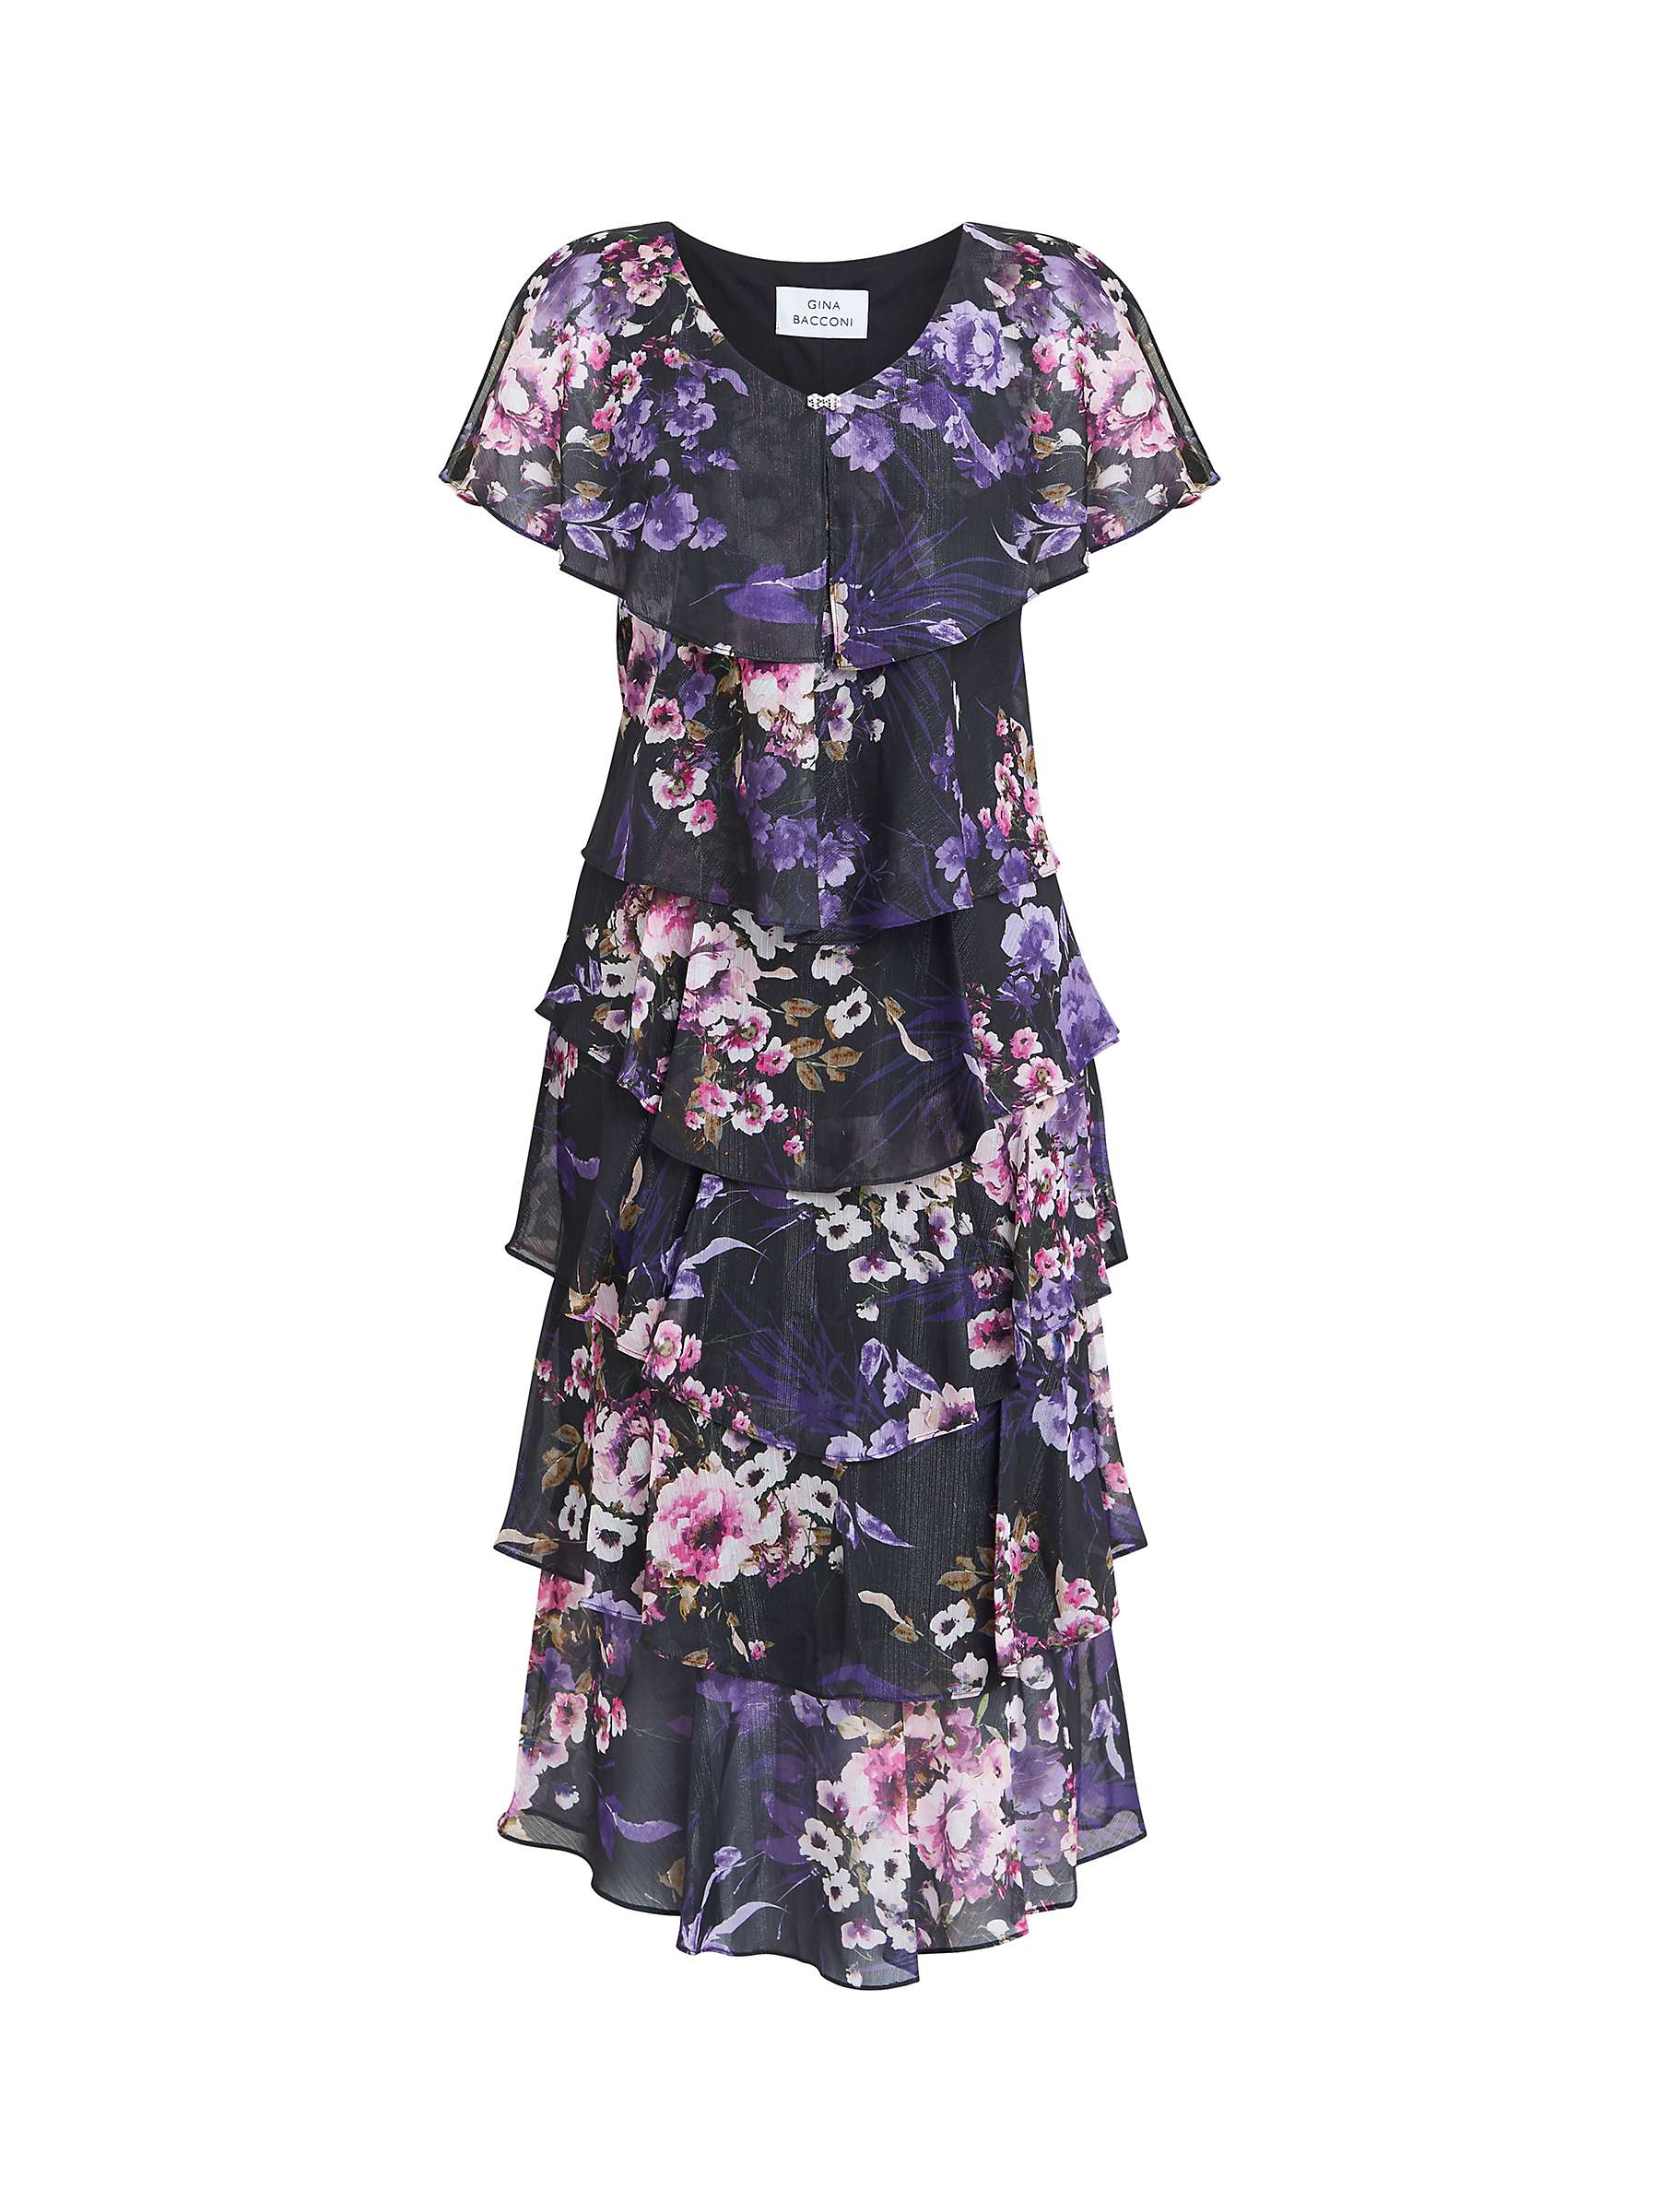 Buy Gina Bacconi Leticia Floral Print Midi Tiered Dress, Black/Multi Online at johnlewis.com